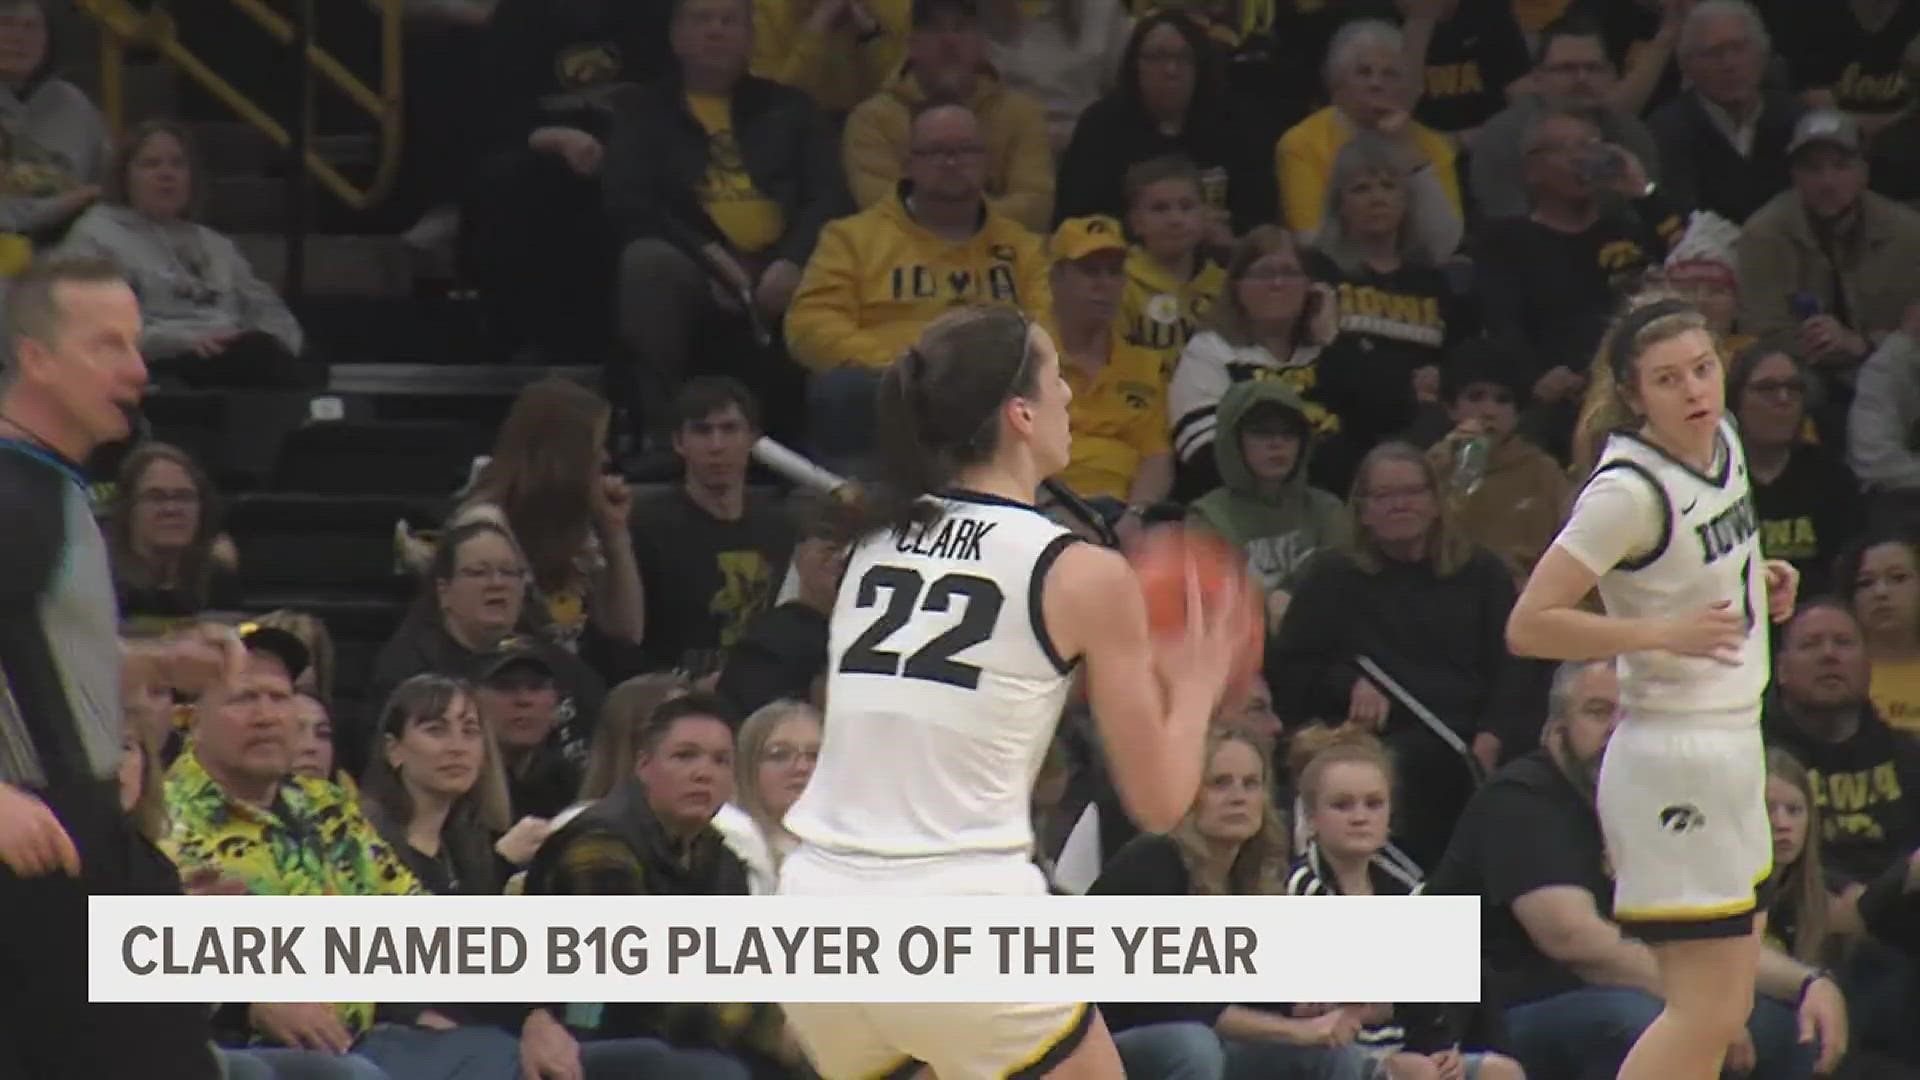 The junior star averaged 27 points, 8 rebounds and 7 assists per game, bringing the national honor to the Hawkeyes for the fifth time in six years.